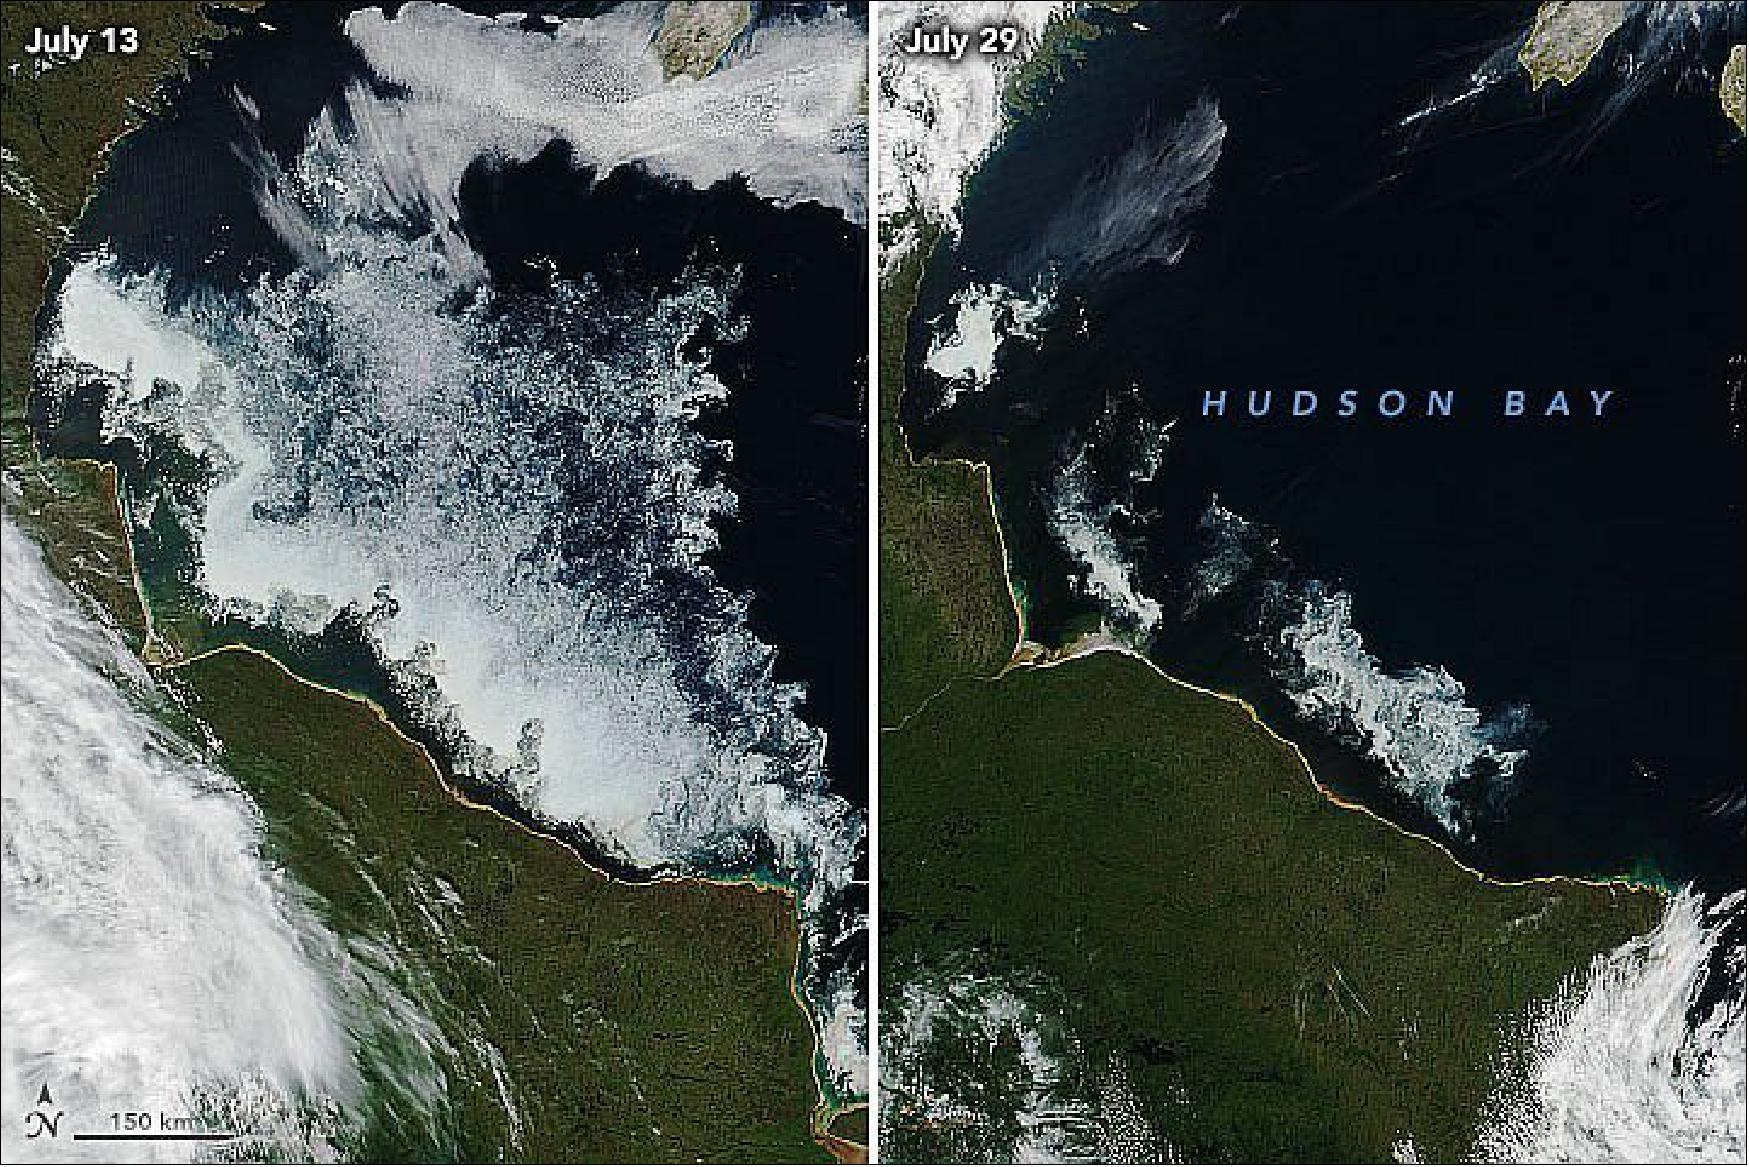 Figure 12: Polar bears rely on sea ice to hunt seals, their preferred prey. As the sea ice breaks up, satellites often capture stunning natural-color images of the changing conditions. For instance, the Visible Infrared Imaging Radiometer Suite (VIIRS) on Suomi NPP captured this pair of images highlighting the drawdown of sea ice between July 13 and July 29, 2020. While many parts of the Arctic saw unusually rapid melting and low levels of ice through July 2020, conditions were a bit more hospitable to sea ice in southwestern Hudson Bay (image credit: NASA Earth Observatory images by Joshua Stevens, using VIIRS data from NASA EOSDIS/LANCE and GIBS/Worldview and the Suomi NPP. Story by Adam Voiland)